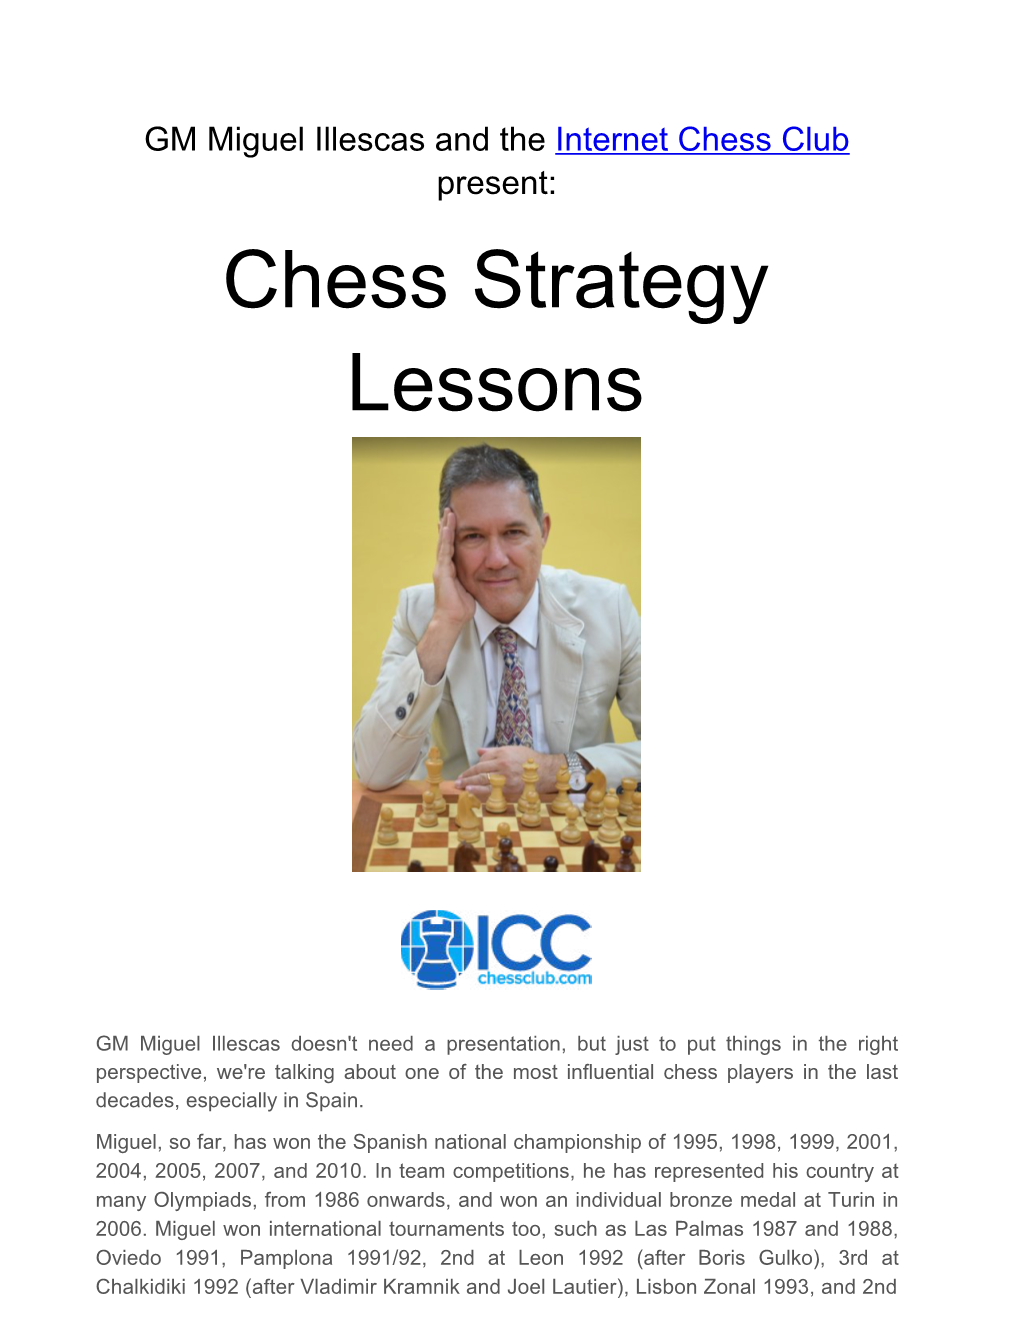 Chess Strategy Lessons